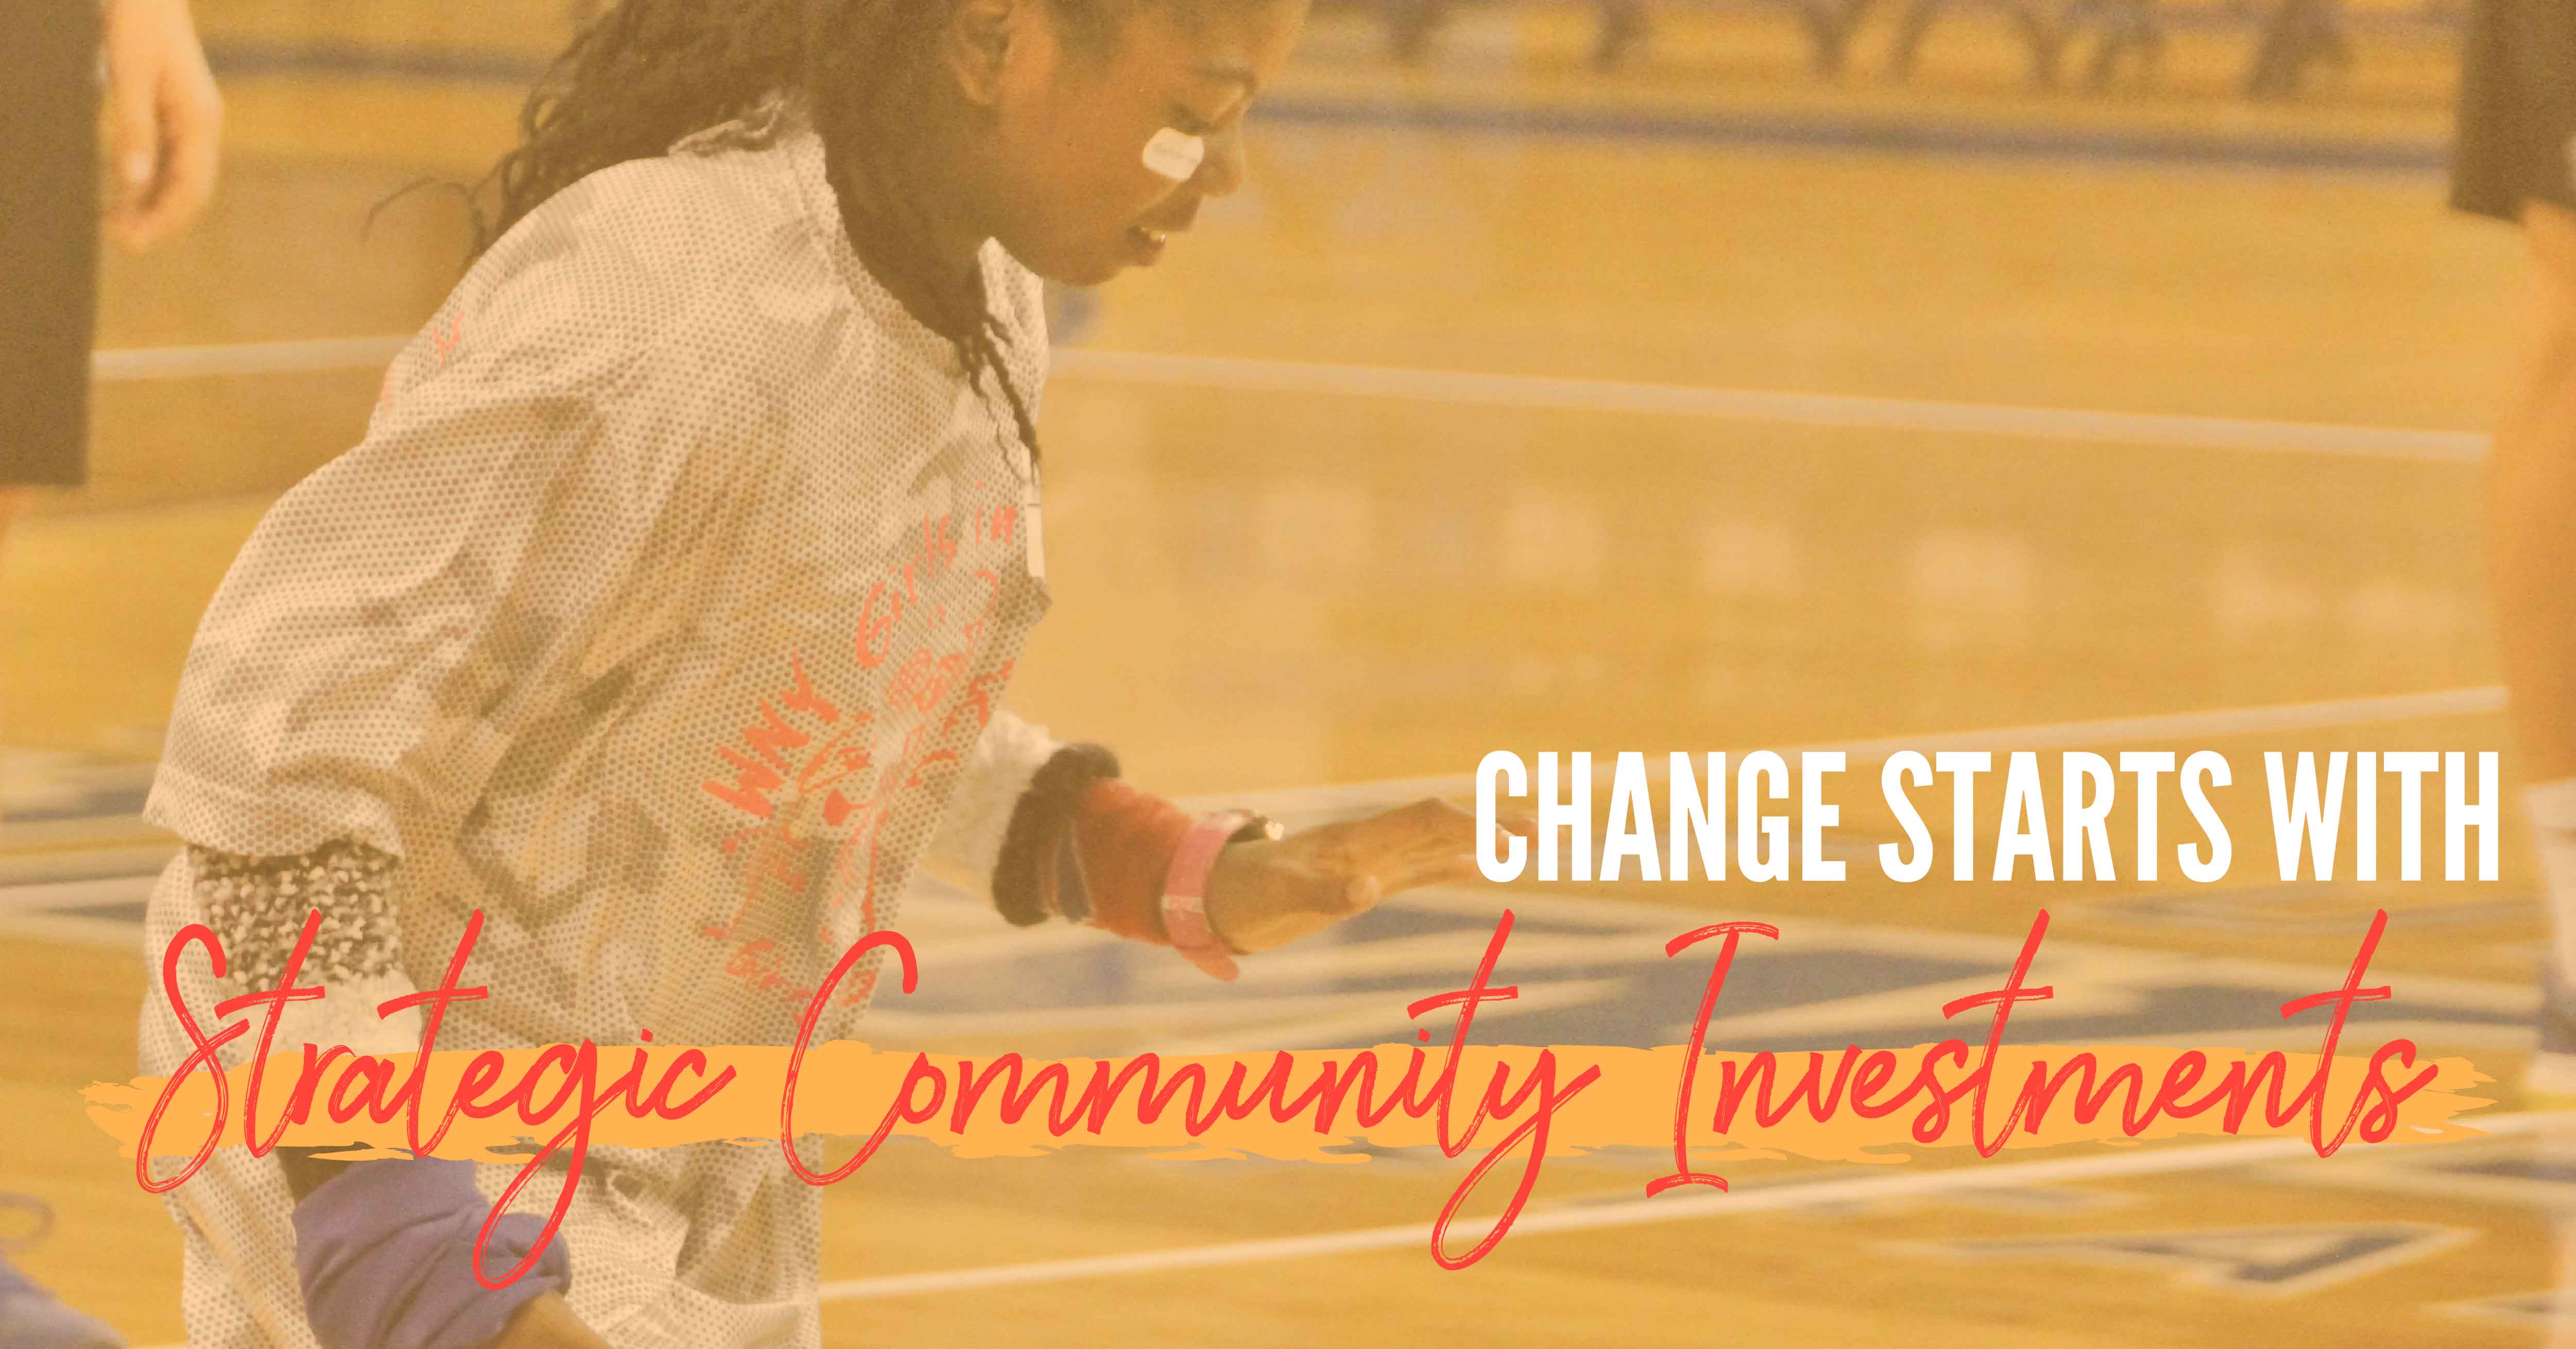 Young girl playing basketball with yellow overlay and the words "change starts with strategic community investments"